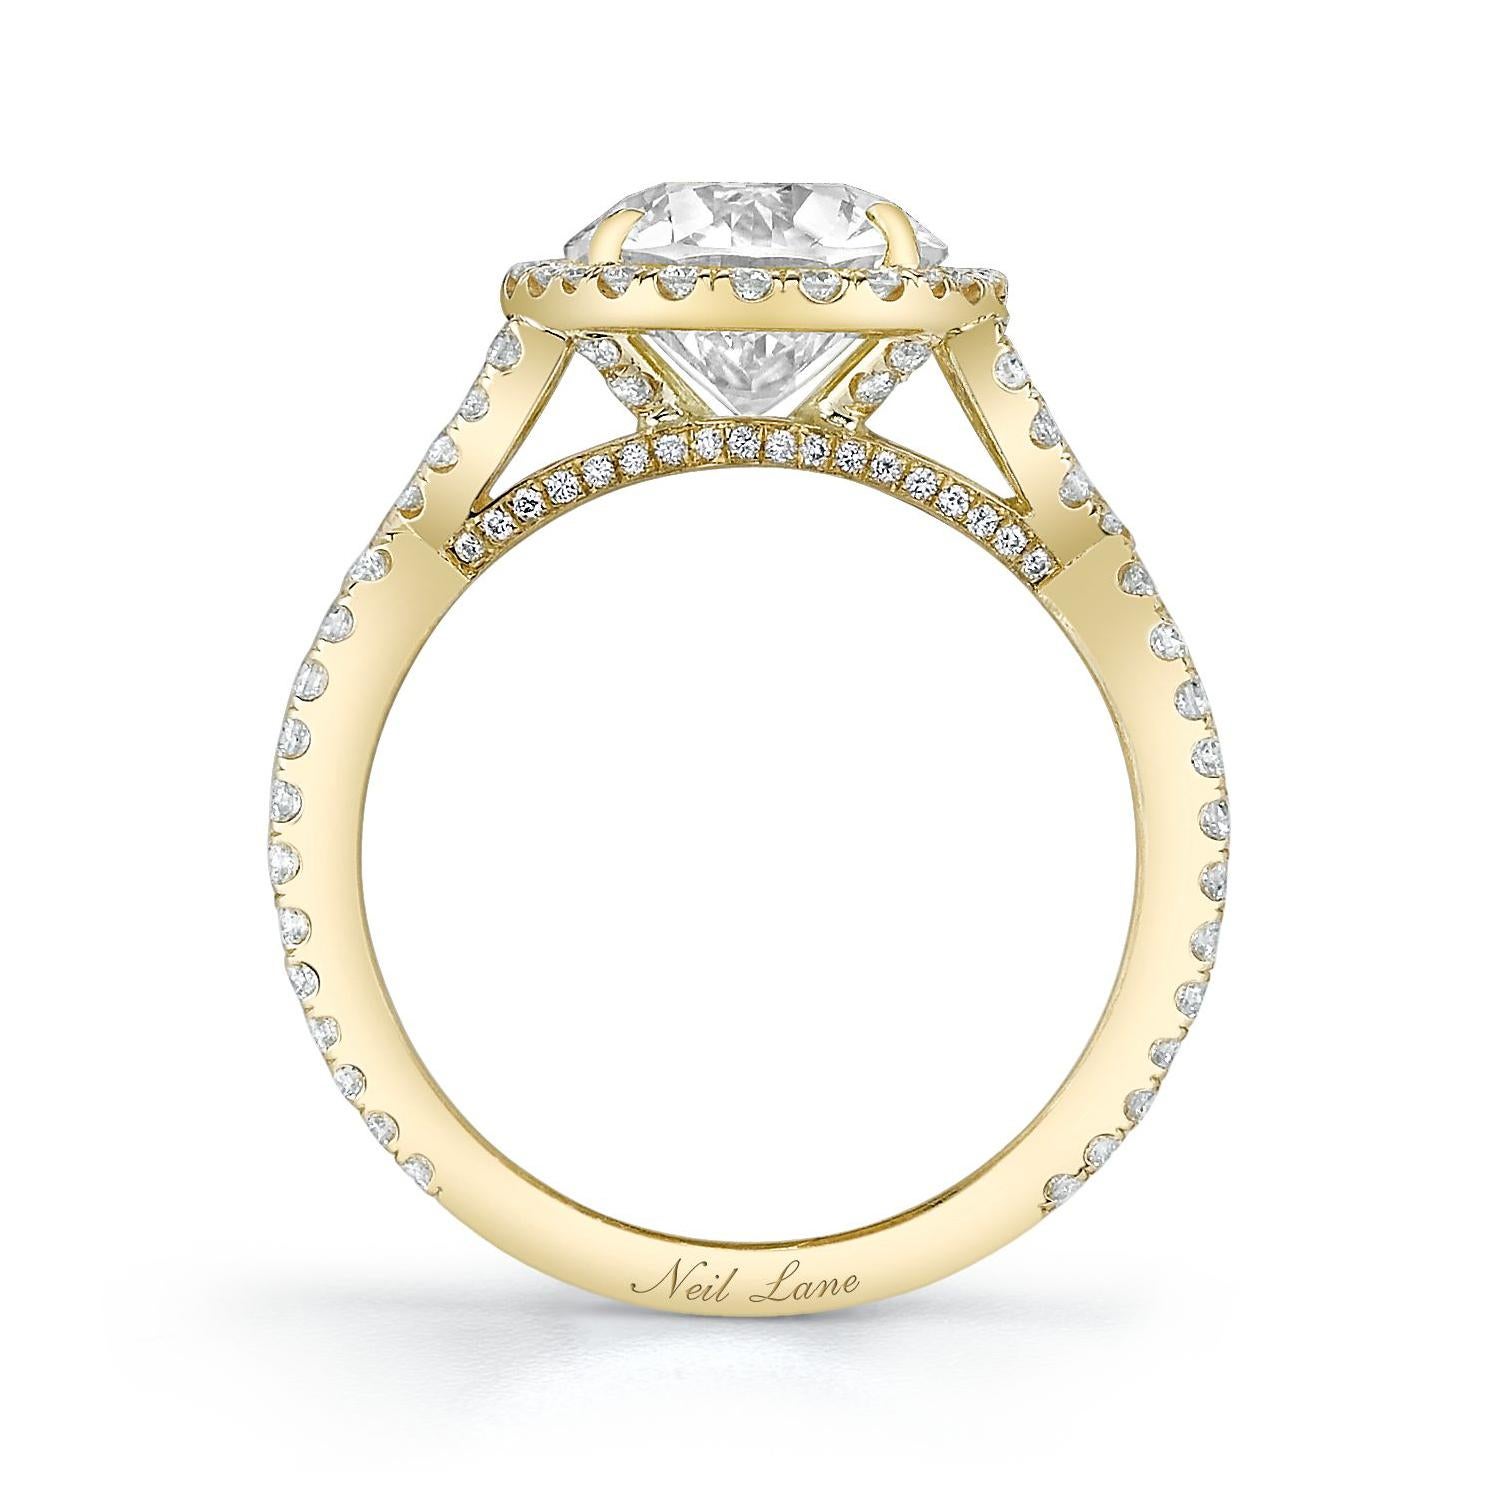 A vintage inspired ring, handmade in 18k yellow gold, features an Old European-Cut diamond weighing 2.15 cts., approximately K-L color & VS1-VS2 clarity, highlighted by one 132 round-cut diamonds weighing 0.86 ct.

Designed & signed by Neil Lane.